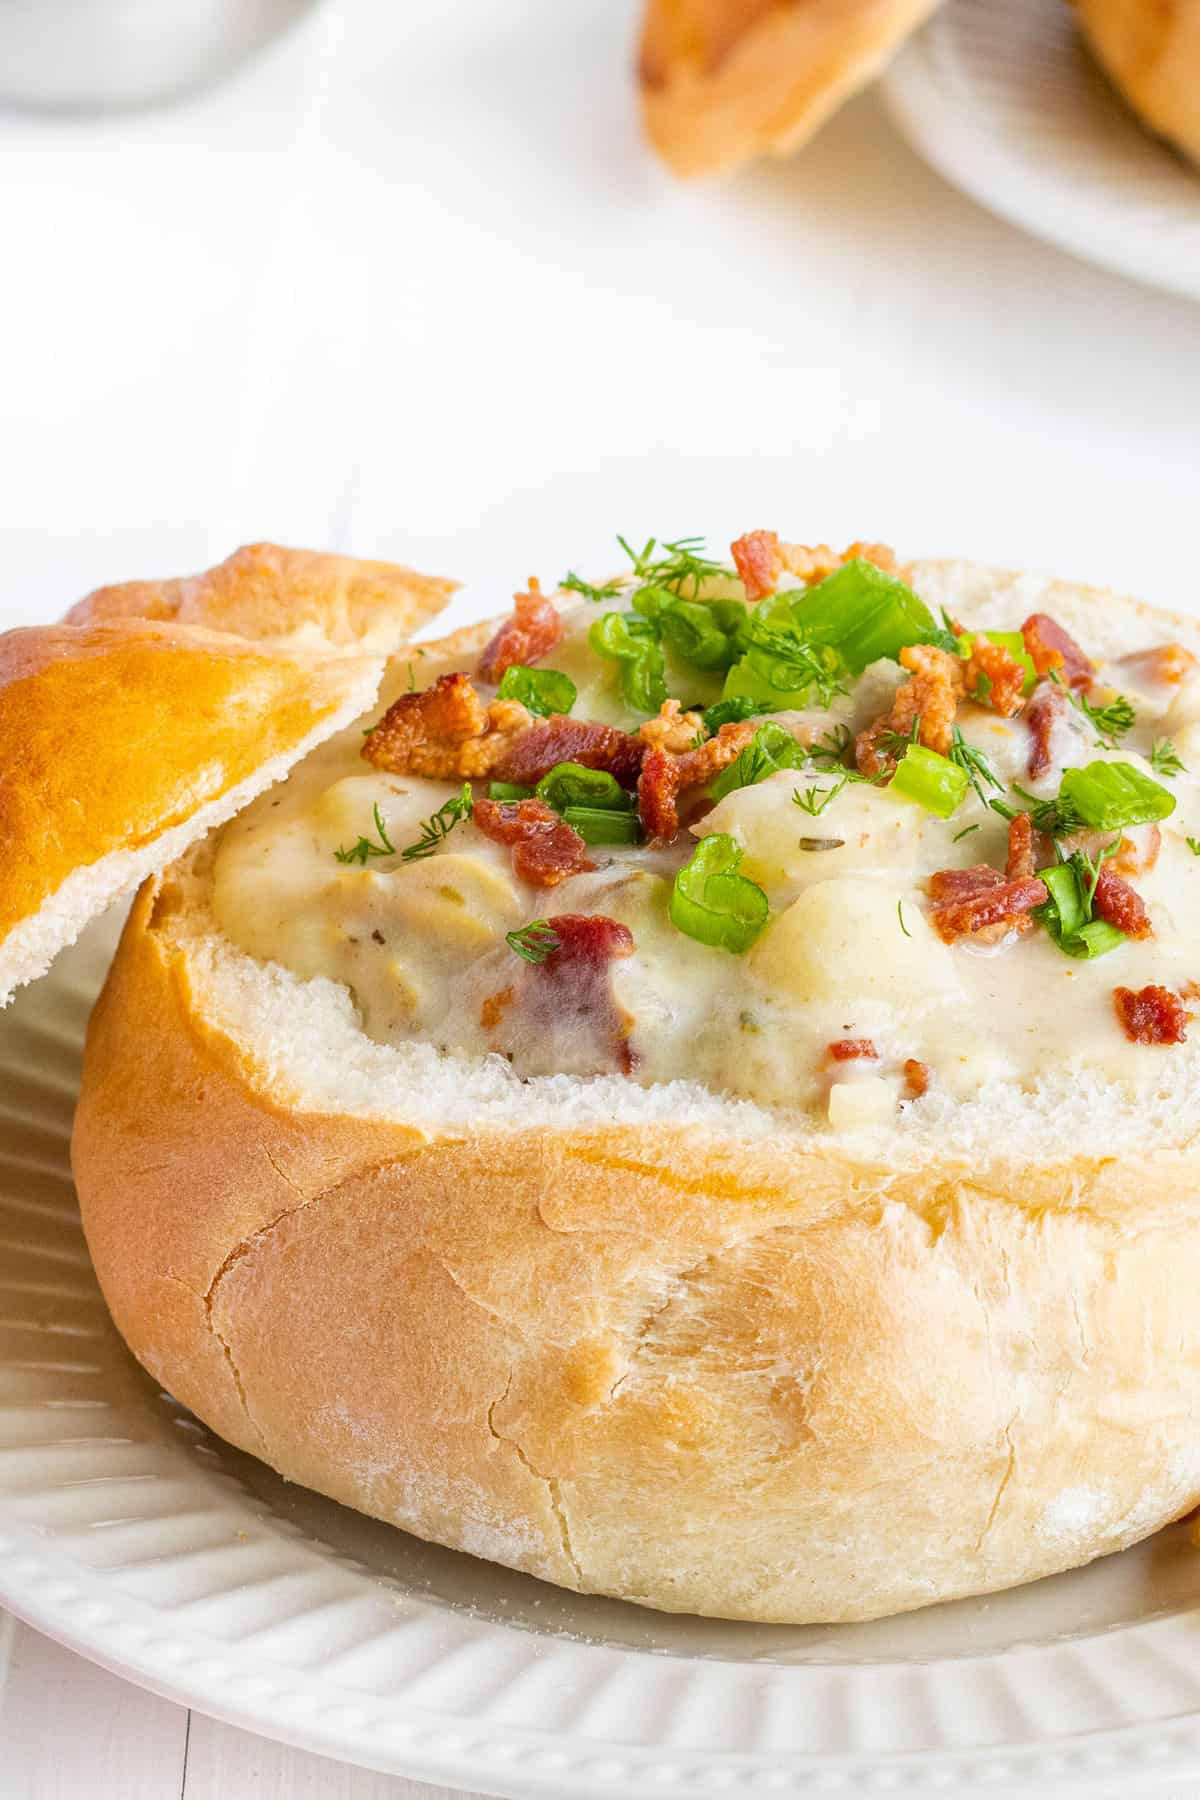 New England Clam Chowder Served in a Bread Bowl Wallpaper